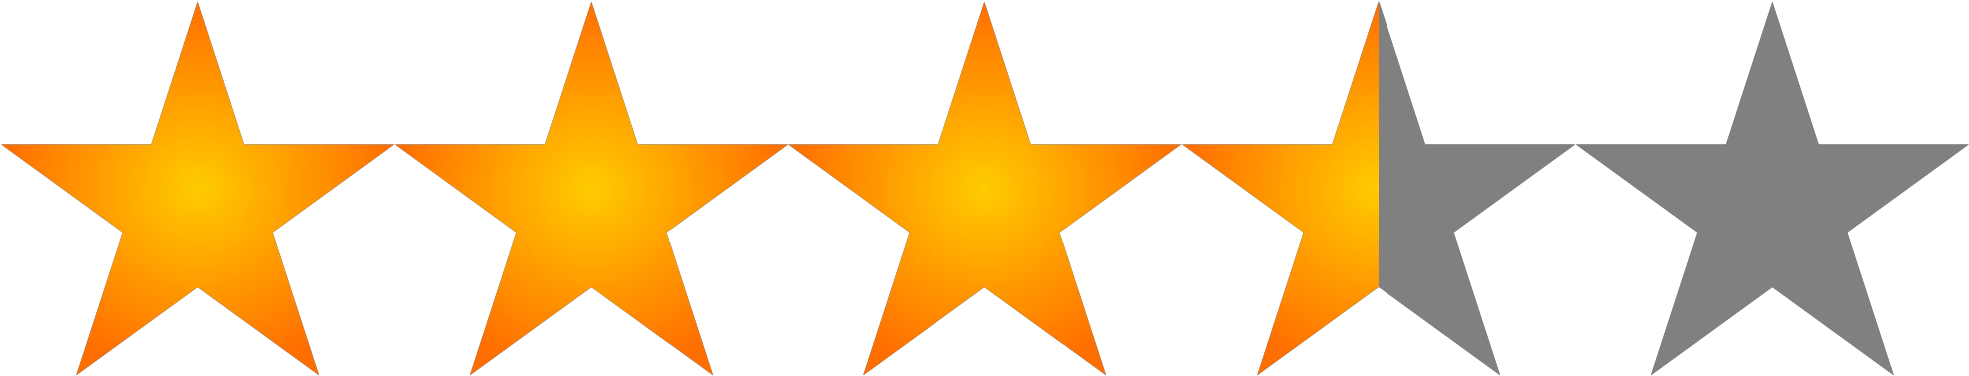 4 Stars Out Of 5 (2000x411)